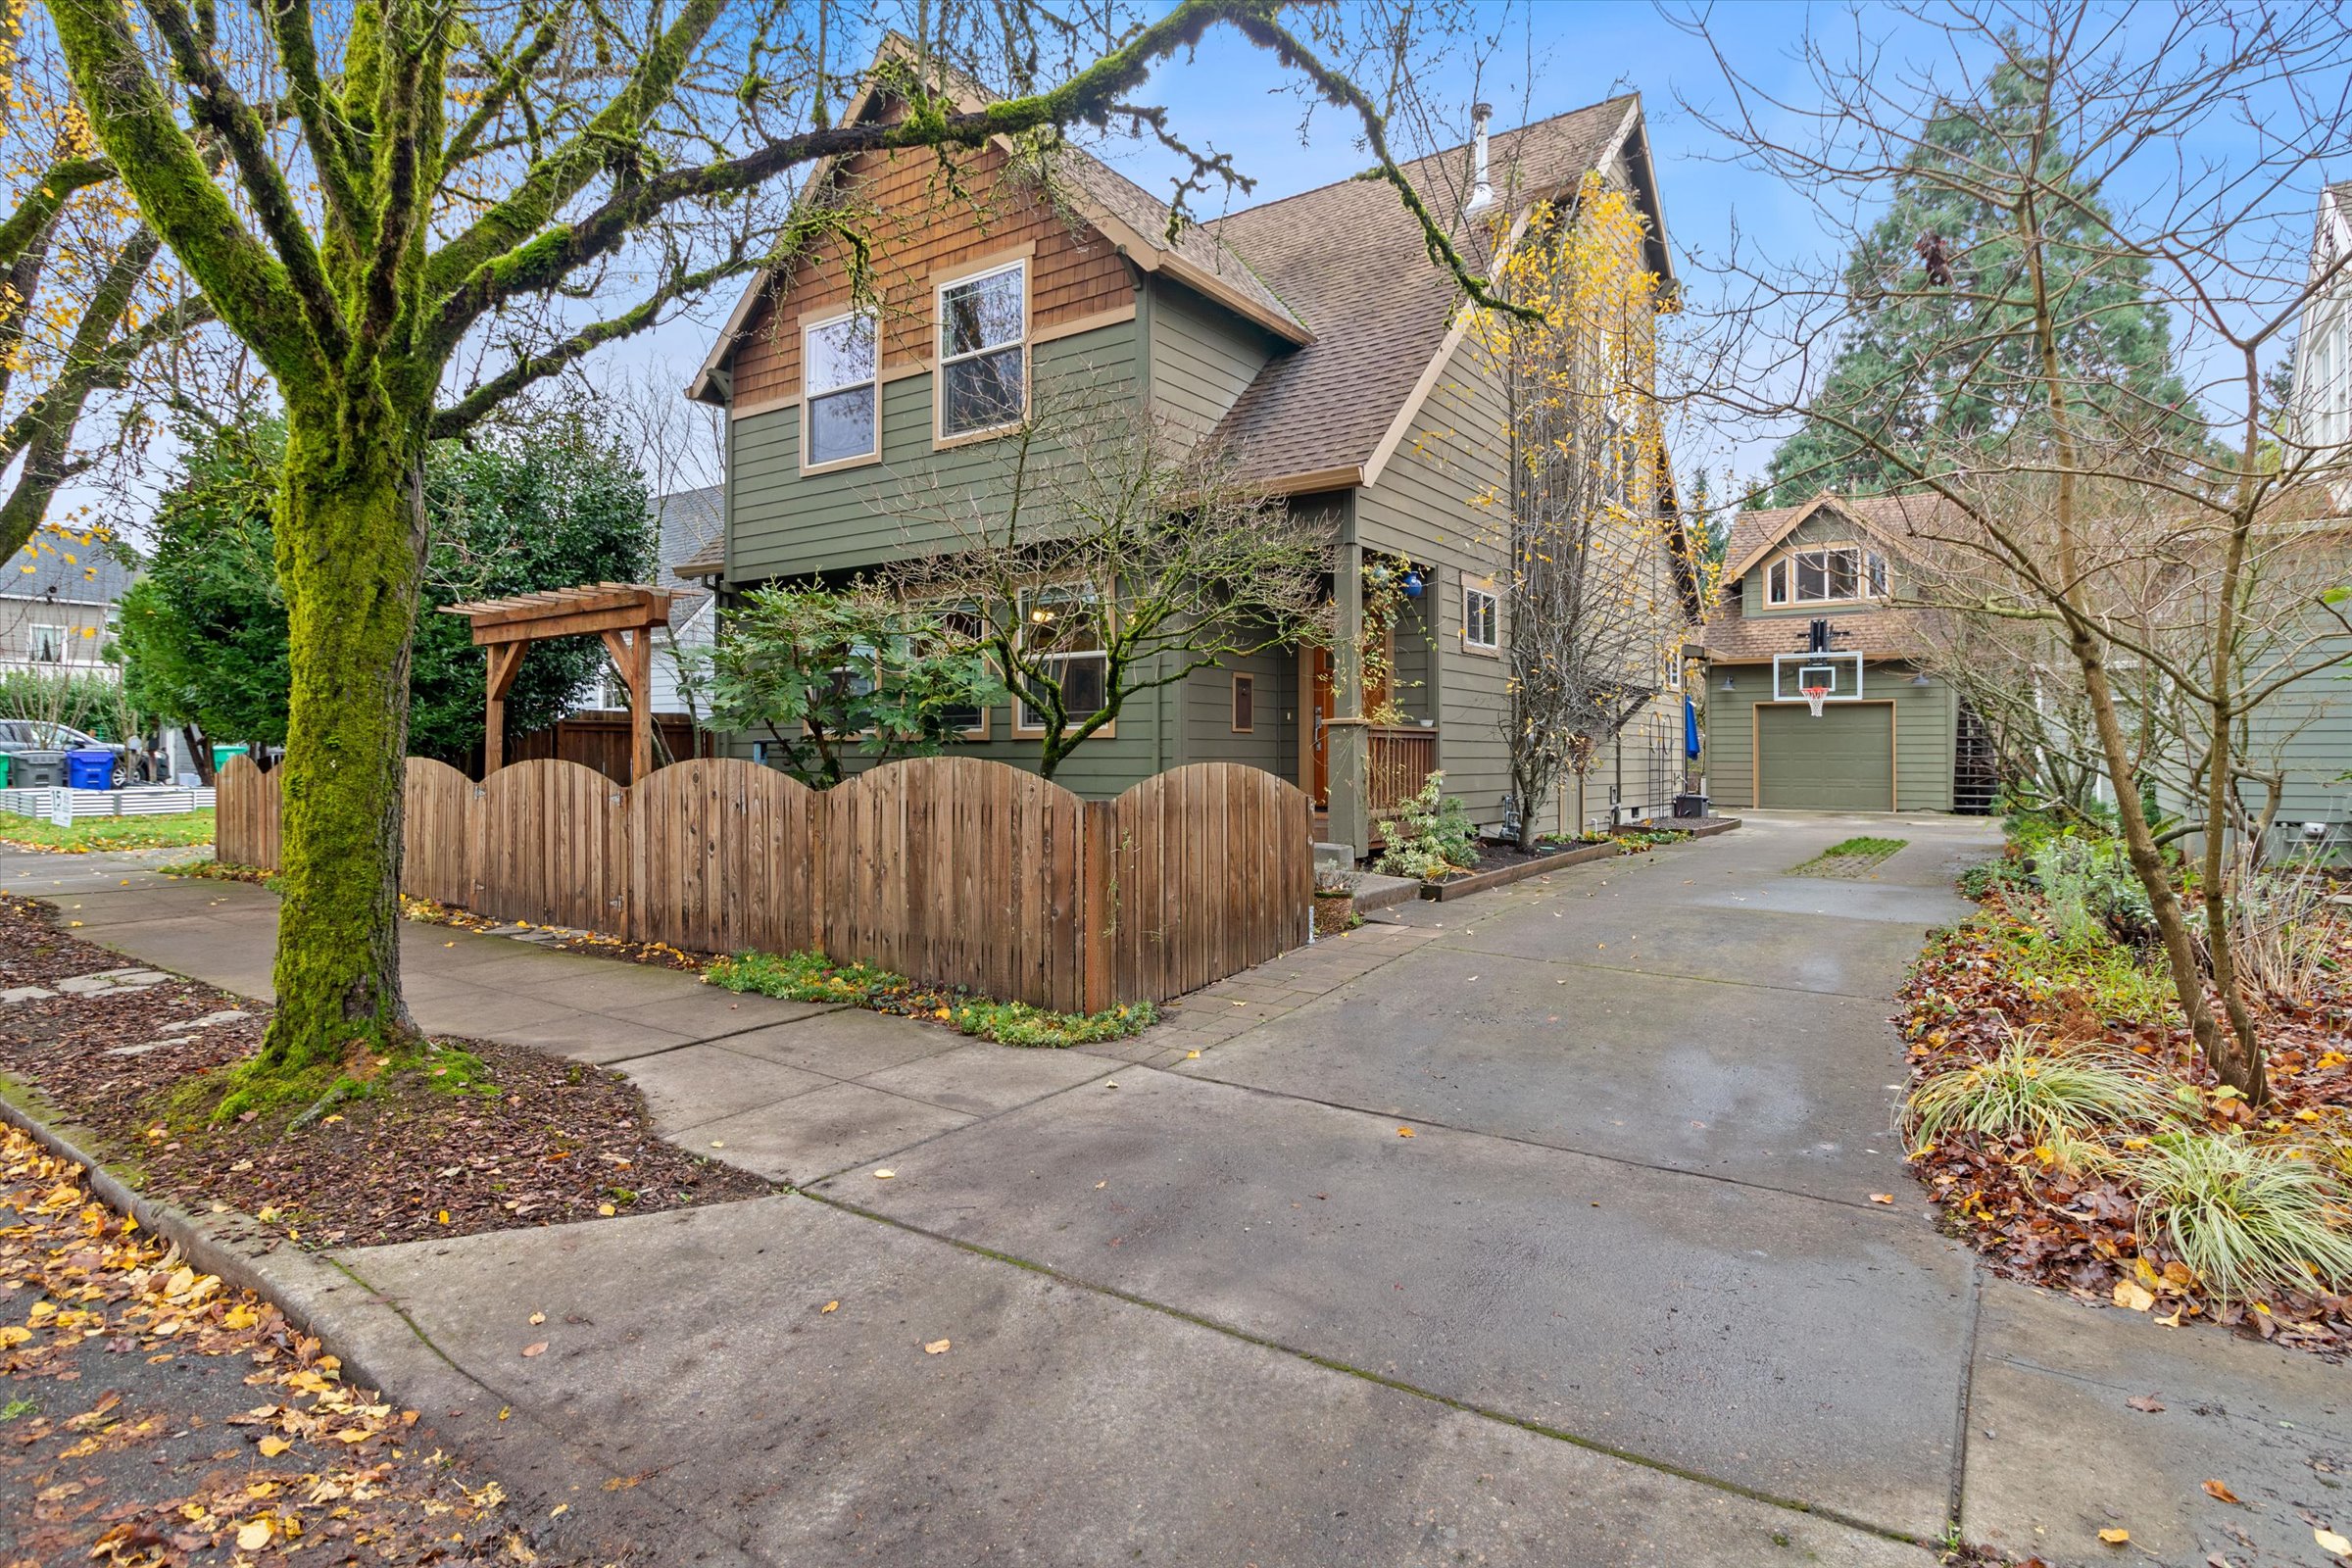 Now Available! 4128 SE Crystal Springs Blvd, Portland 97202. Offered for $829,000